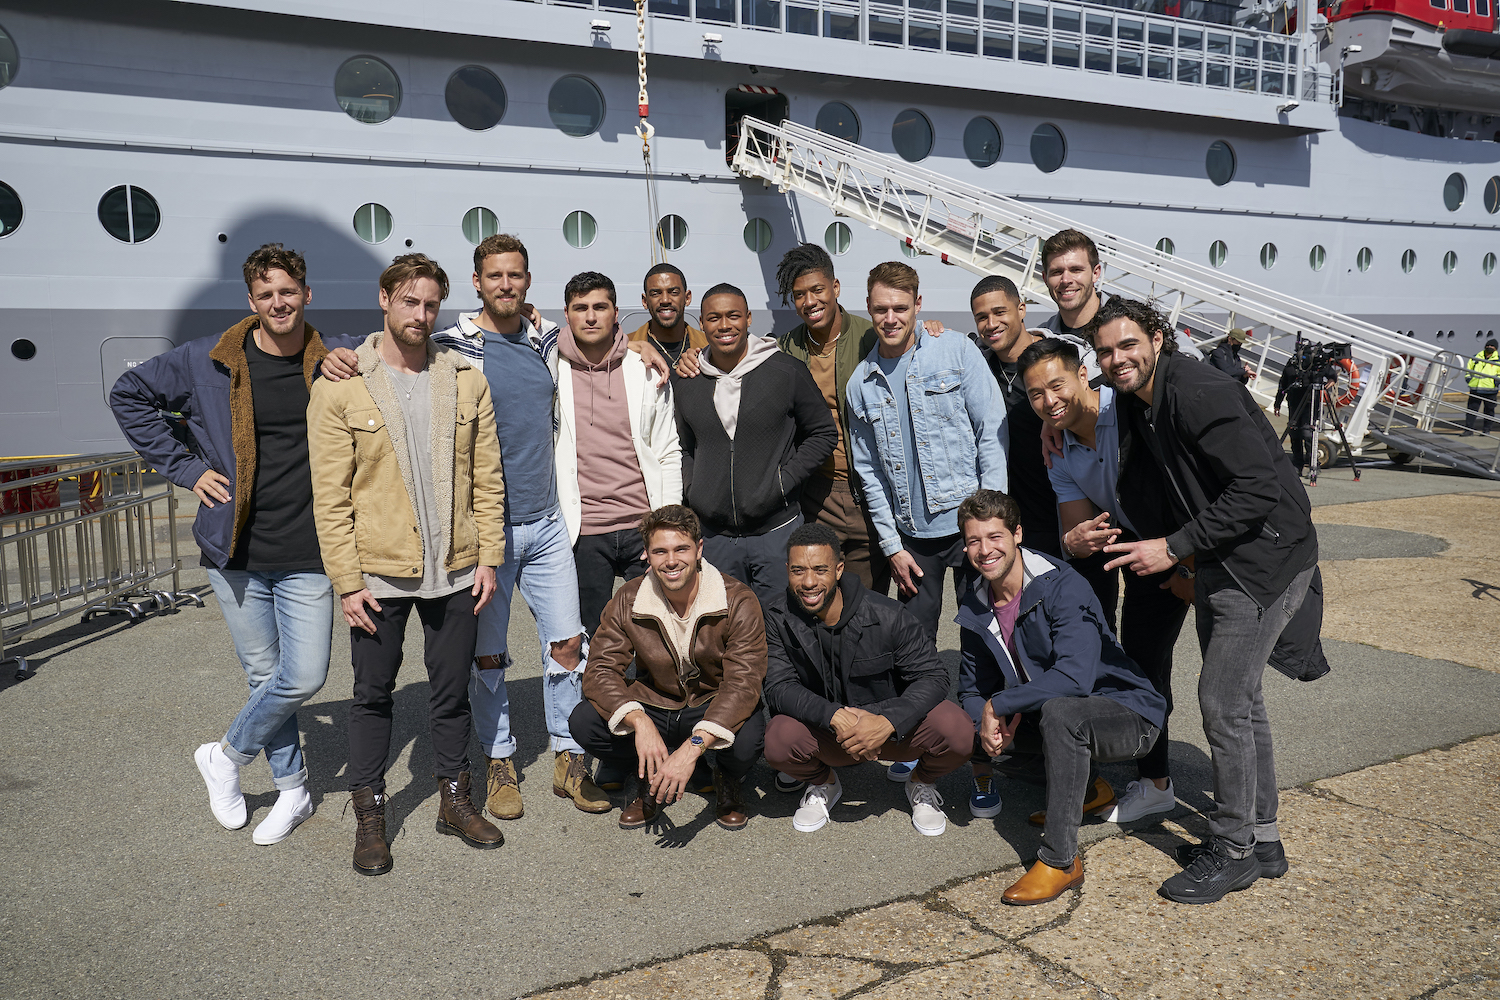 'The Bachelorette' Season 19 cast standing together outside of the cruise ship. Many of the men appear on the 'Men Tell All' special.